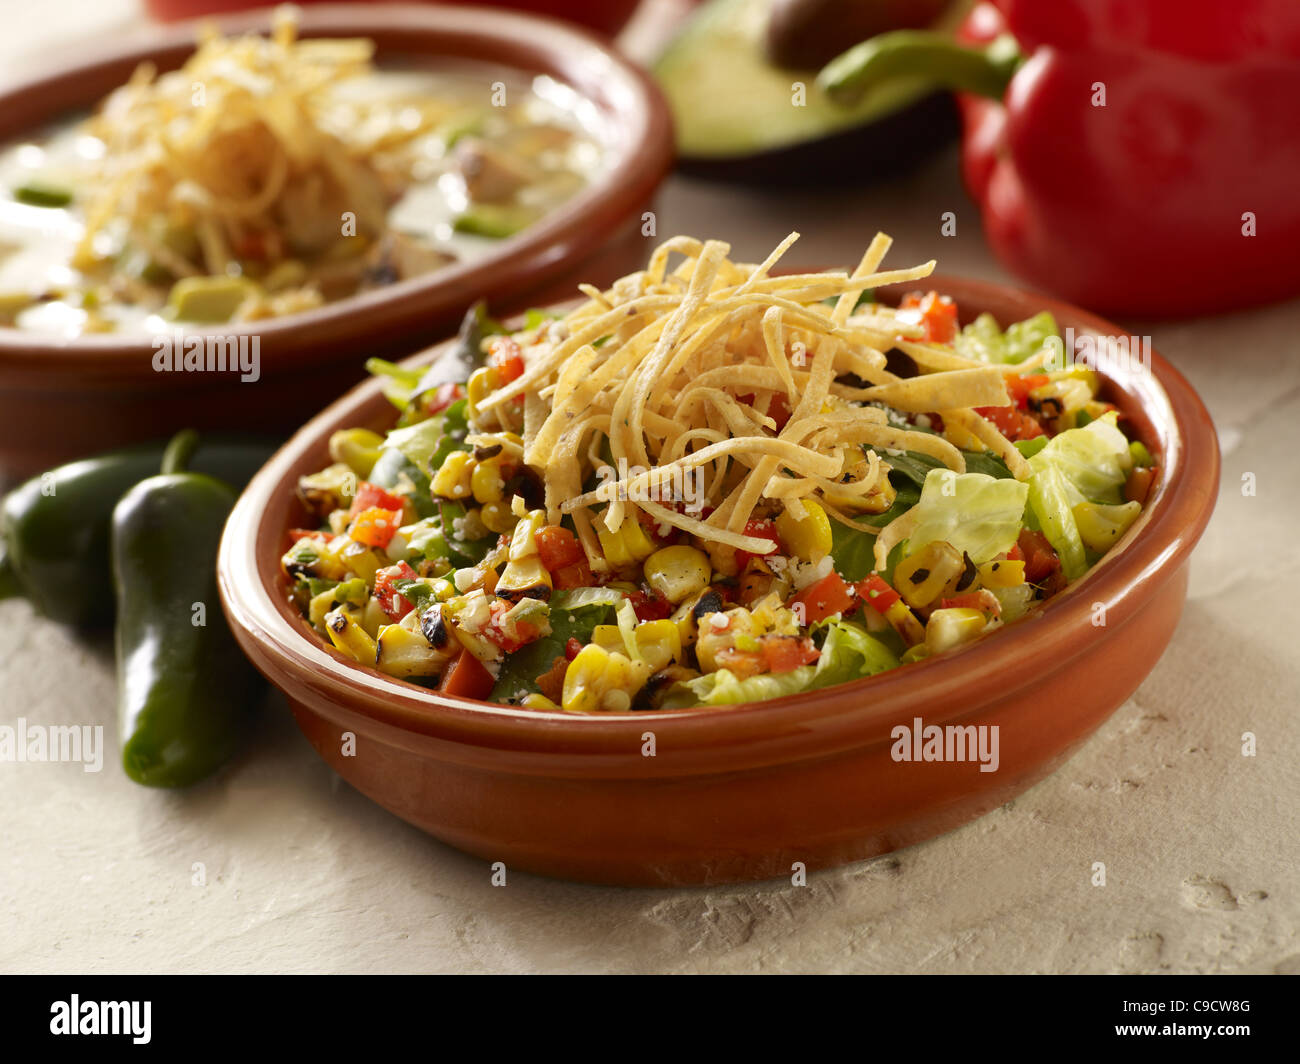 Roasted vegetable salad with lettuce topped with tortilla strips and a bowl of soup Stock Photo